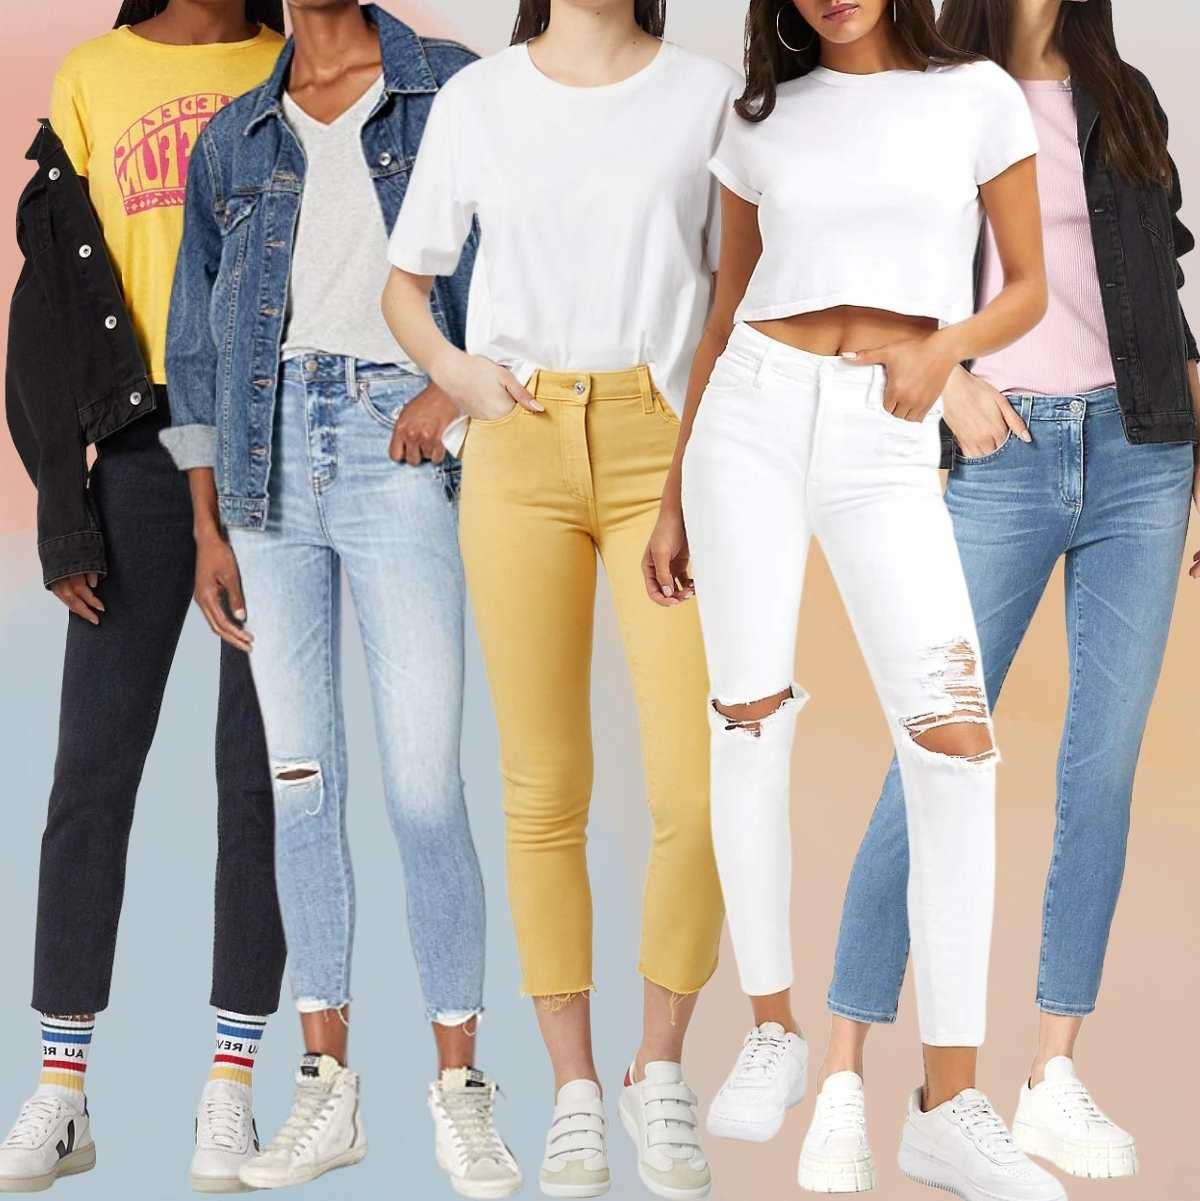 Collage of 5 women wearing retro sneakers with skinny jeans outfits.